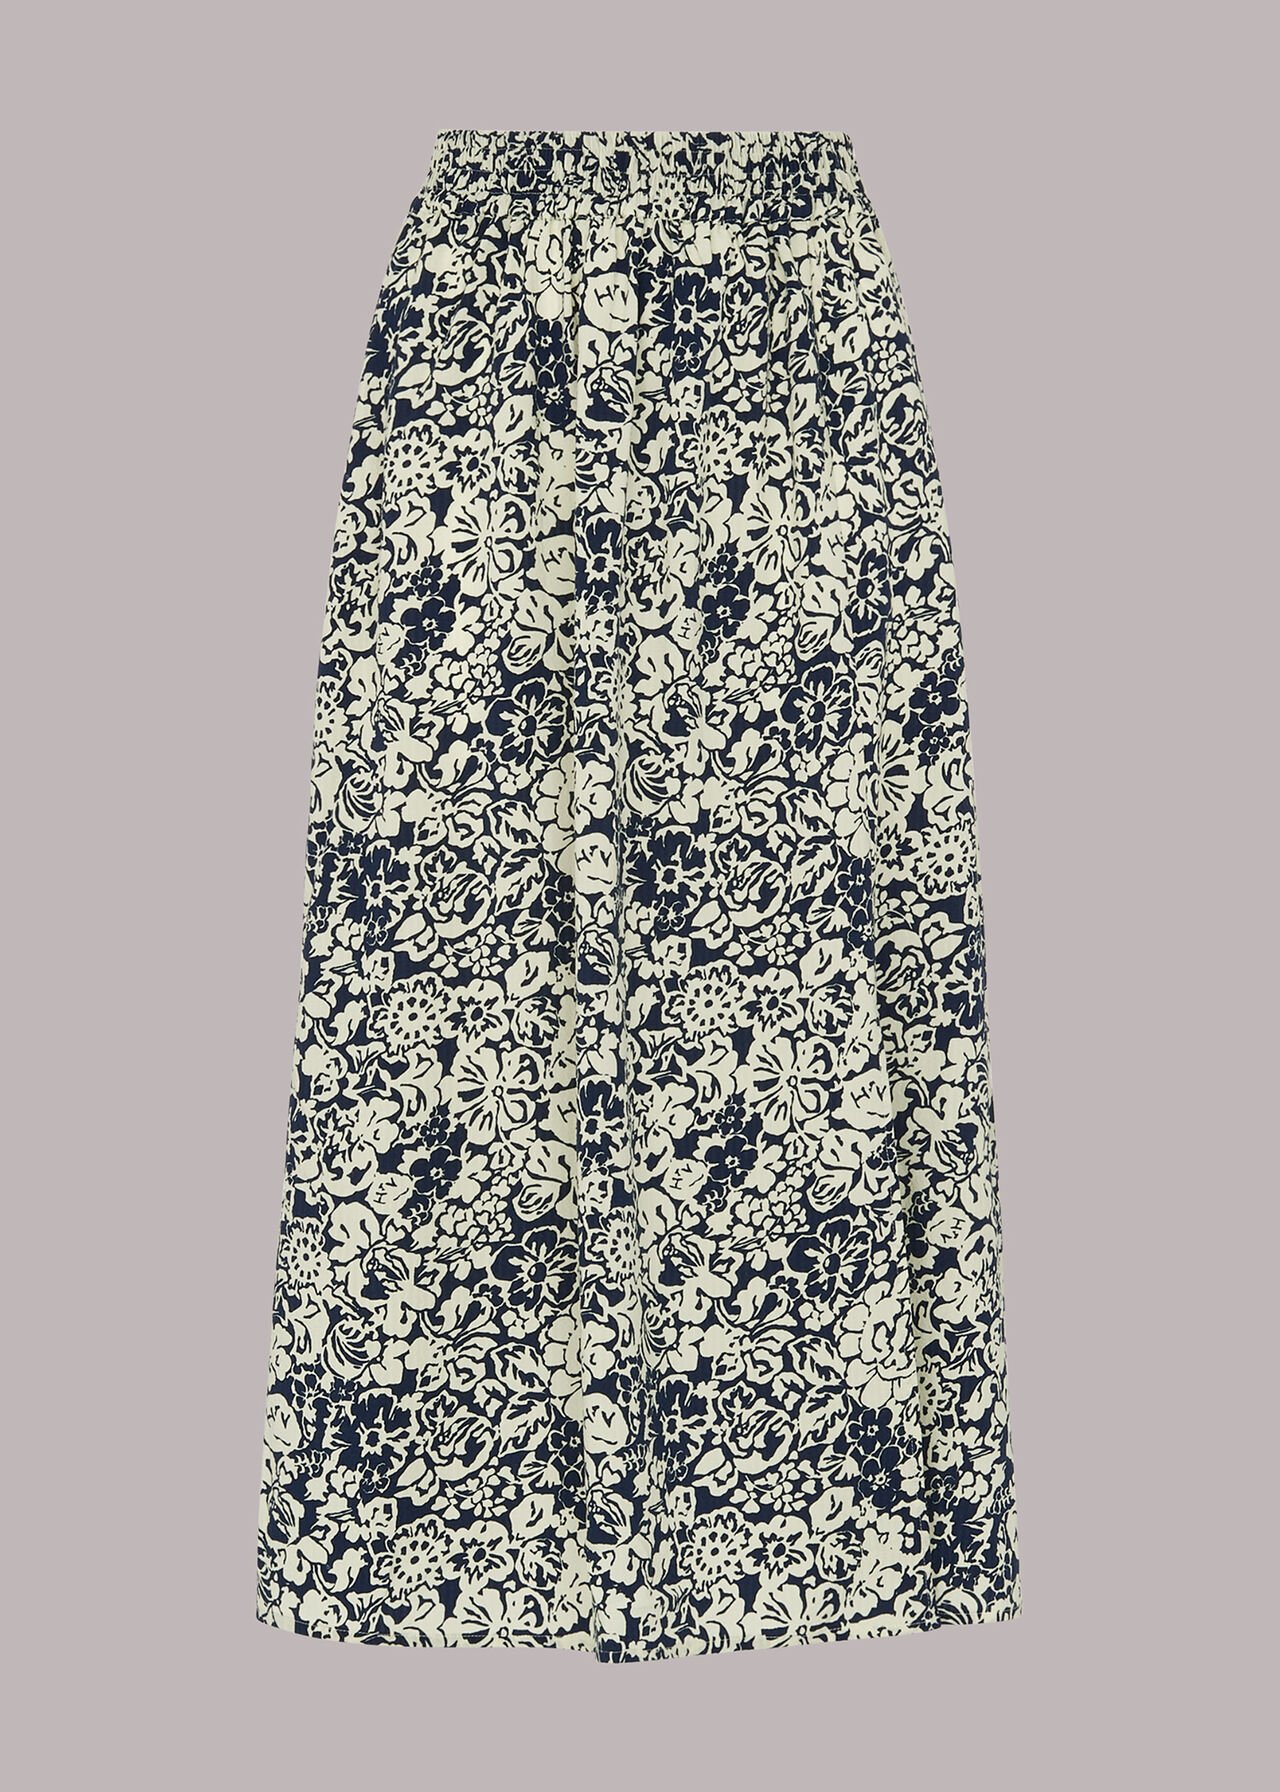 Graphic Floral Pull On Skirt